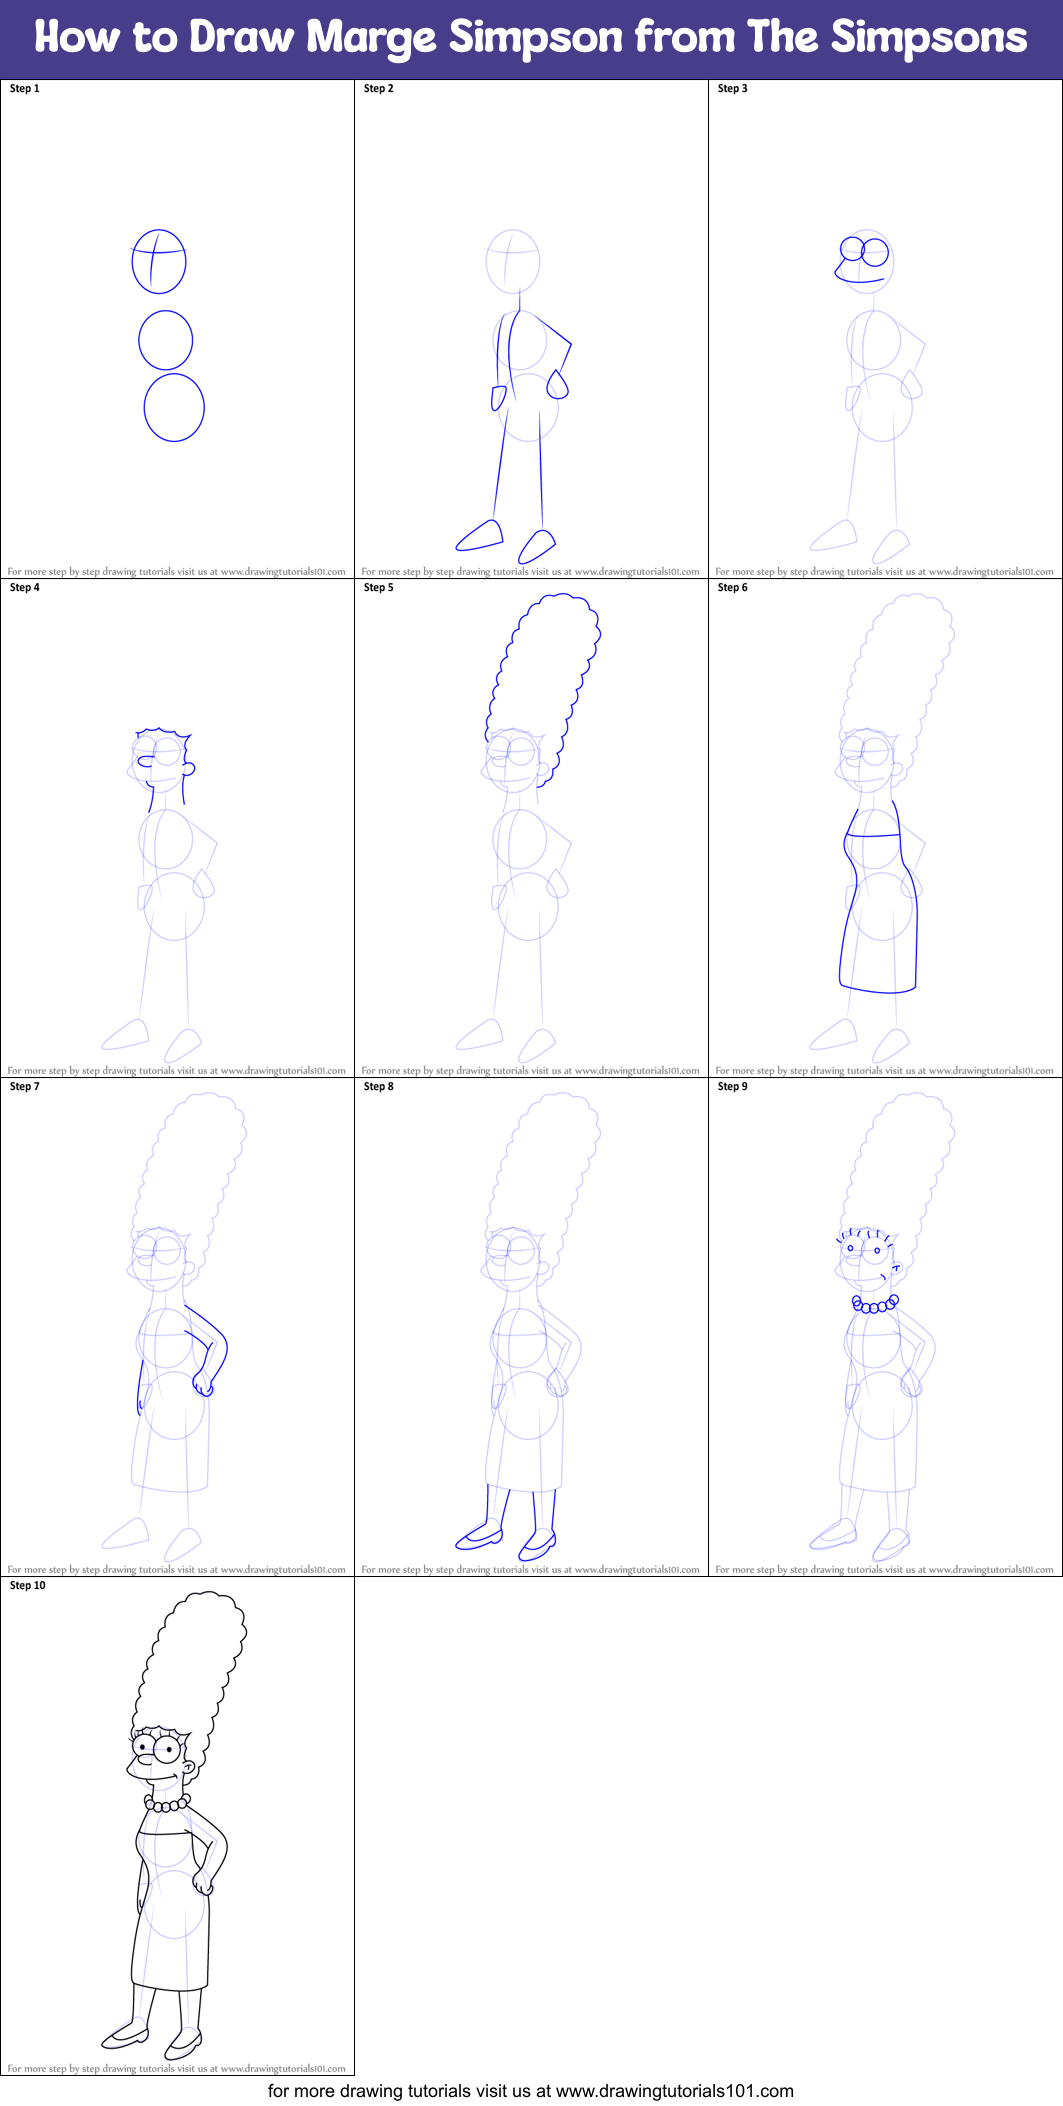 how to draw marge simpson step by step for kids